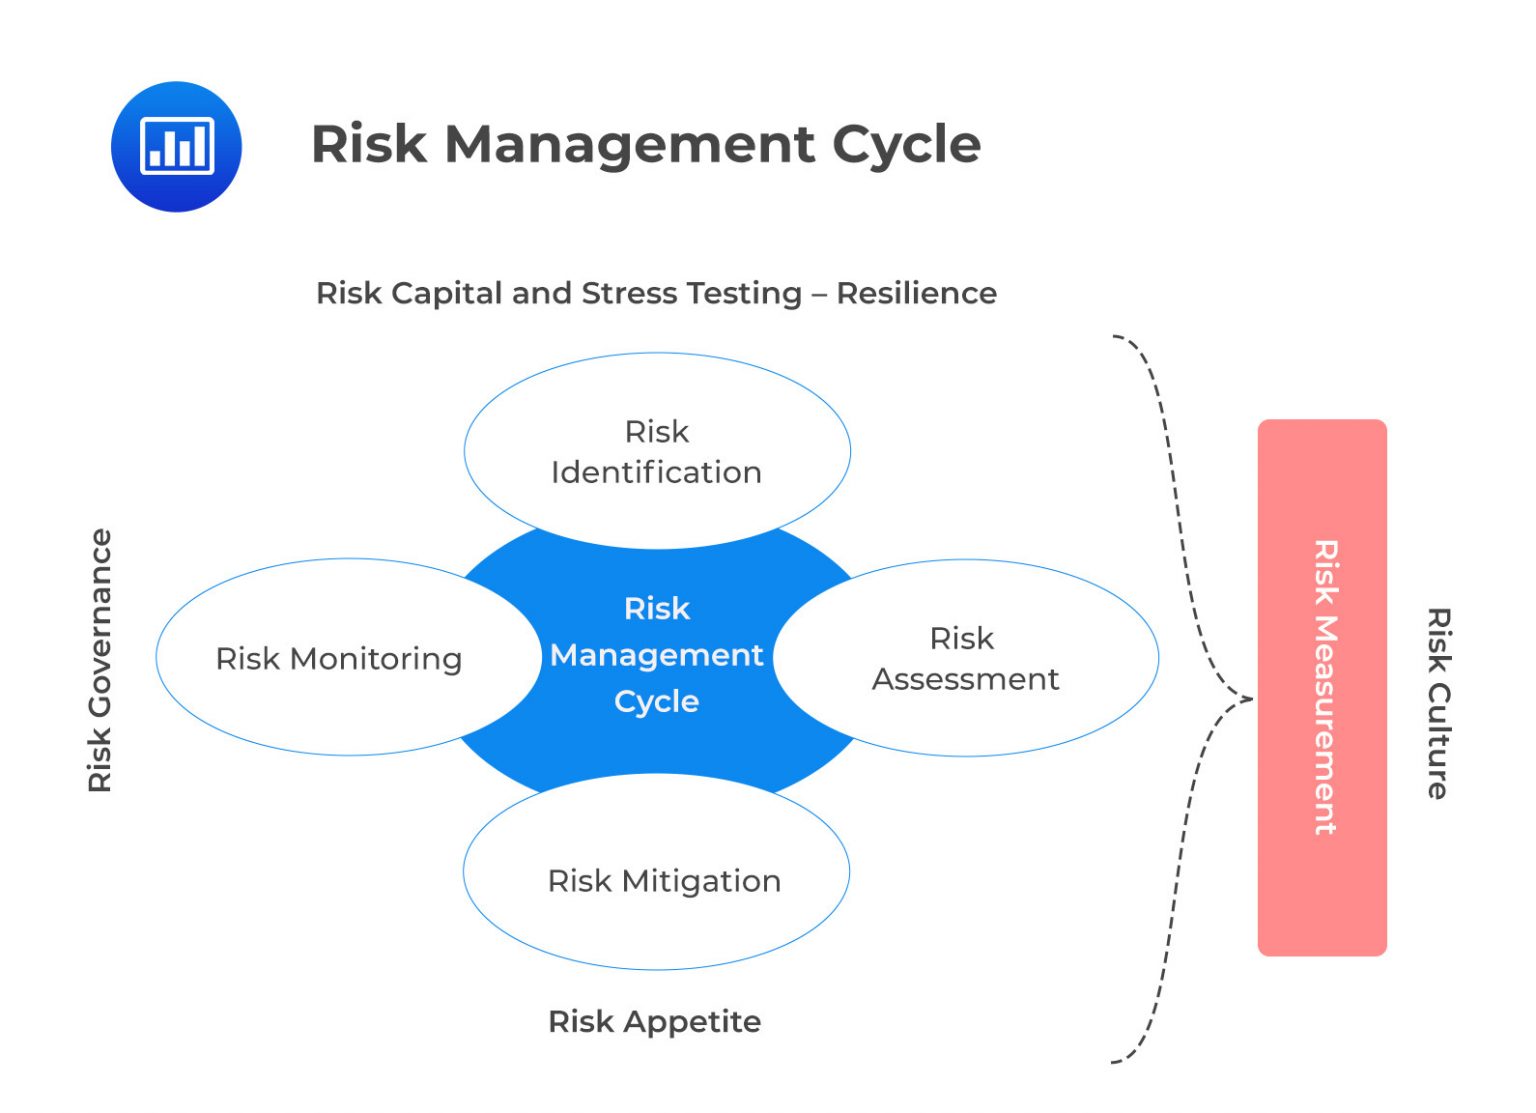 Integrated Risk Management | AnalystPrep - FRM Part 2 Study Notes